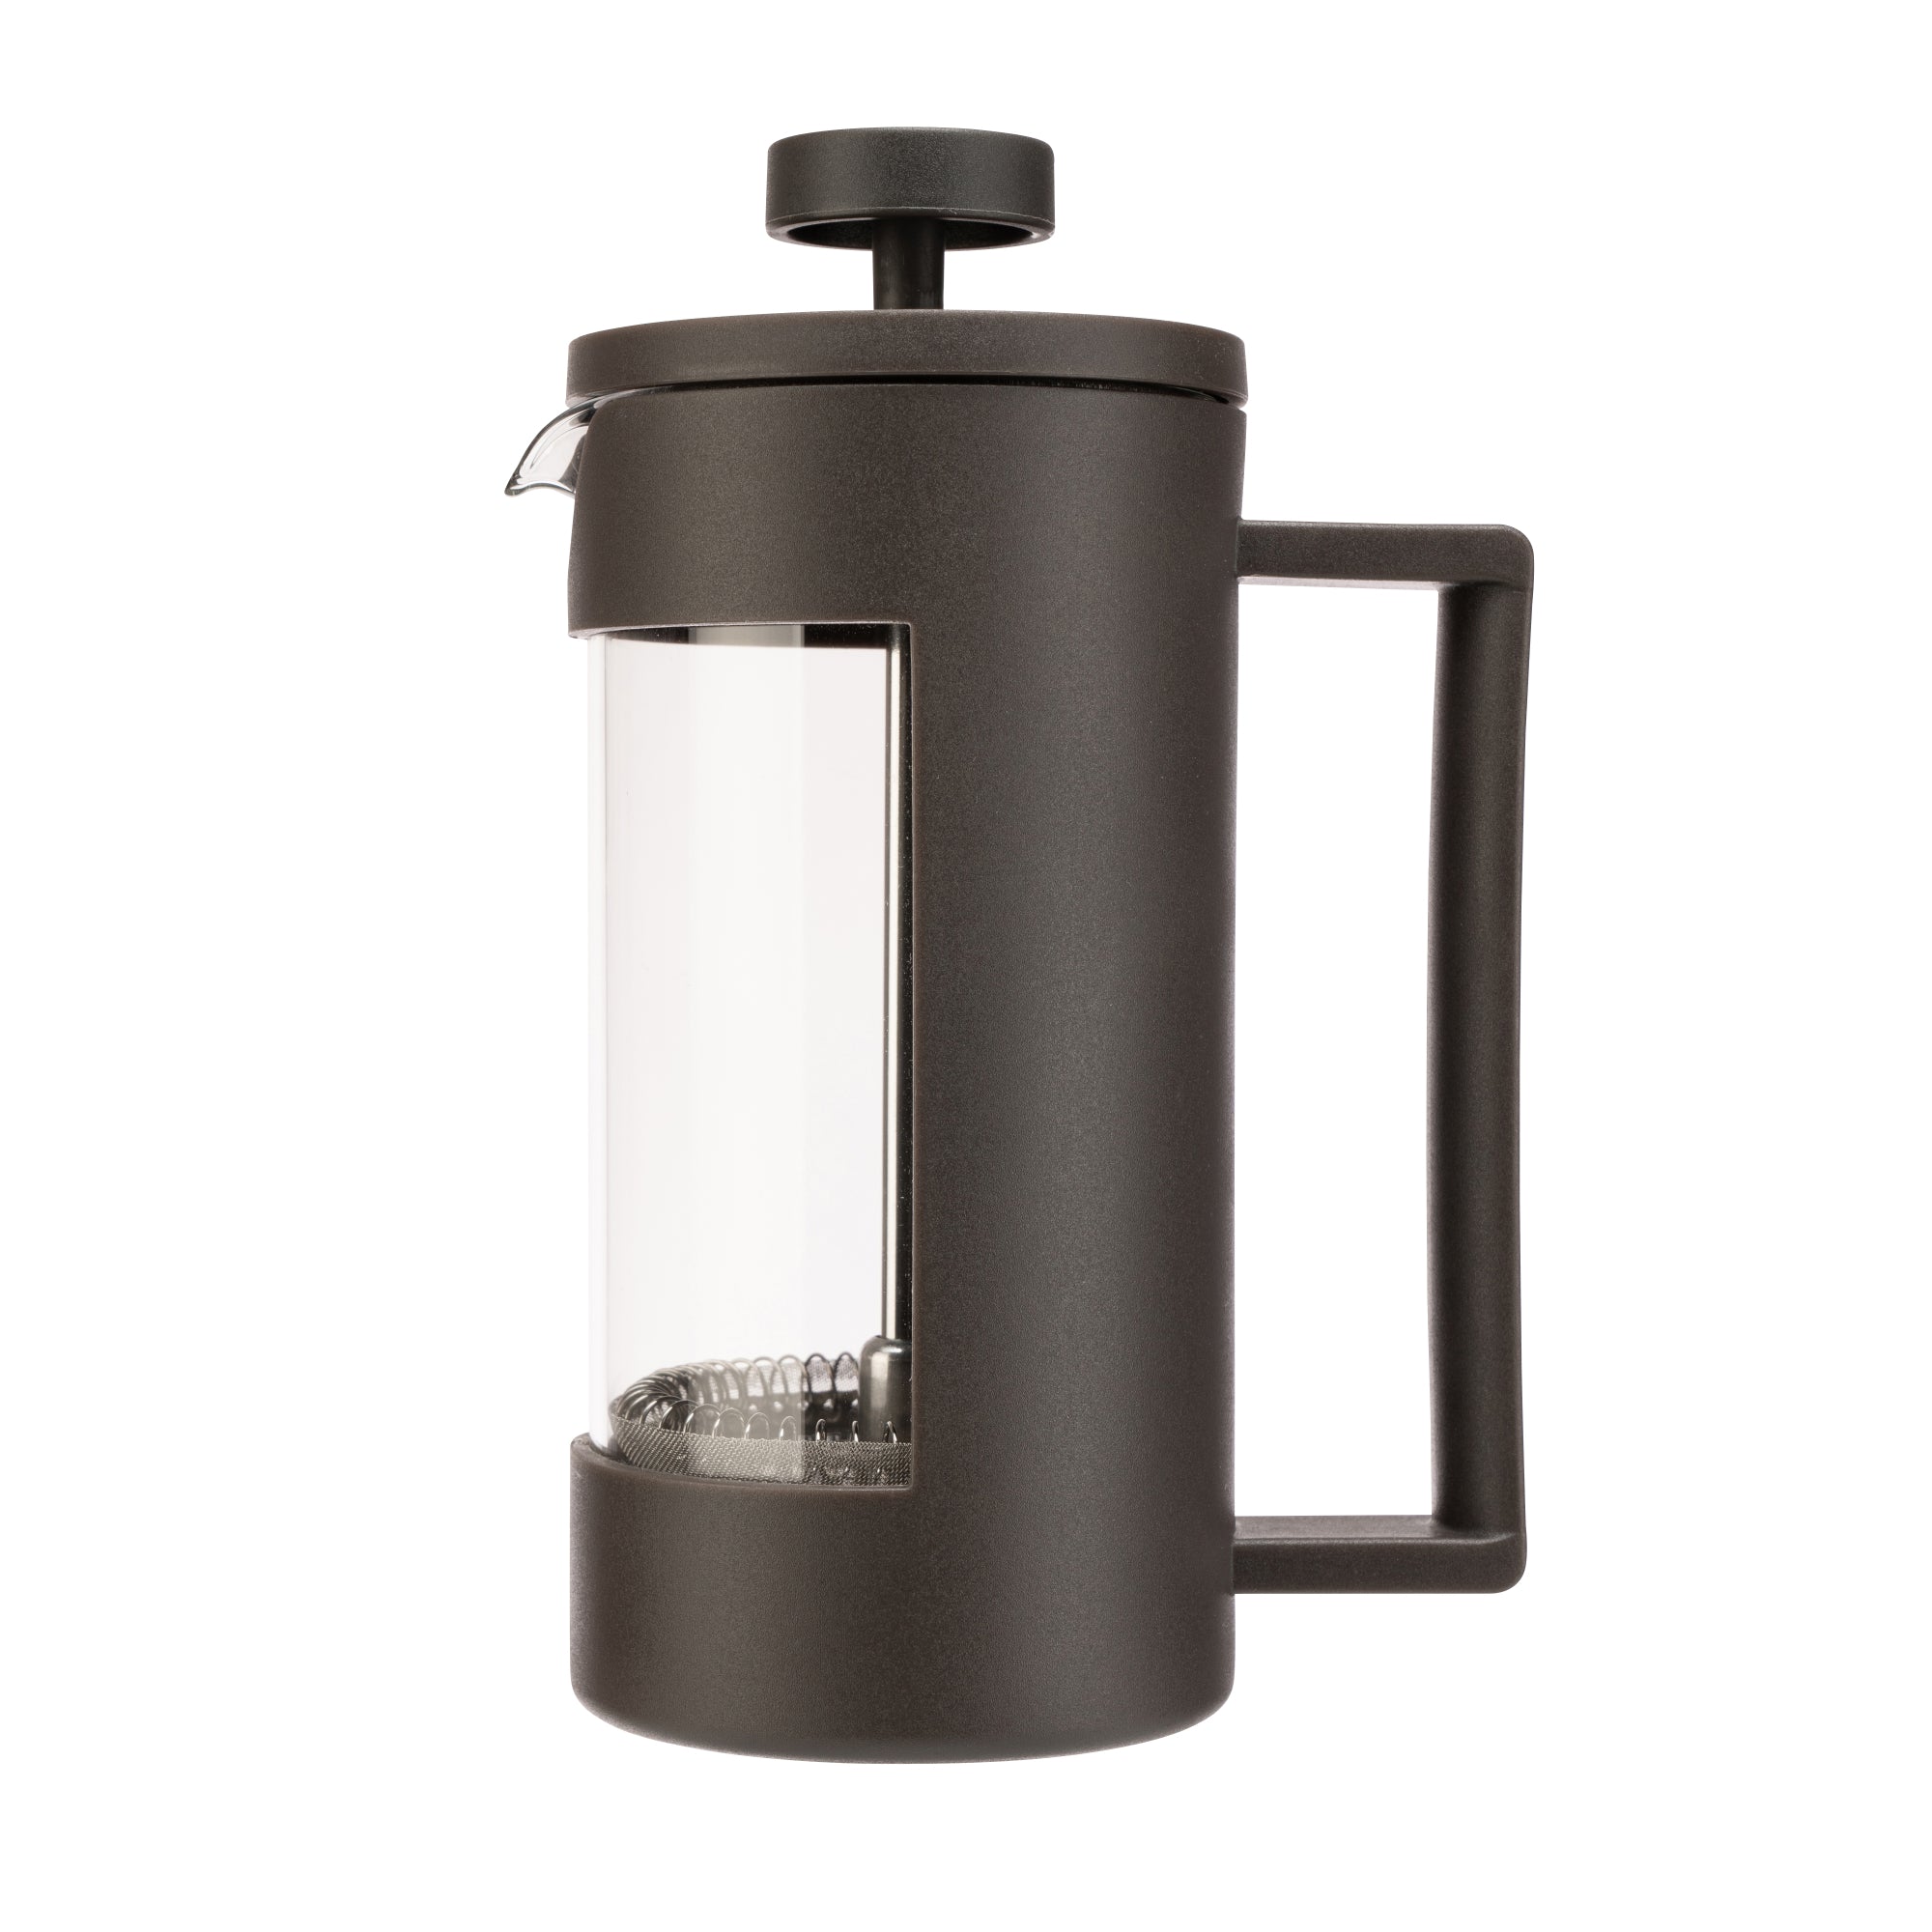 The Home Siip 3 Cup Cafetiere 5 Shaws Department Stores